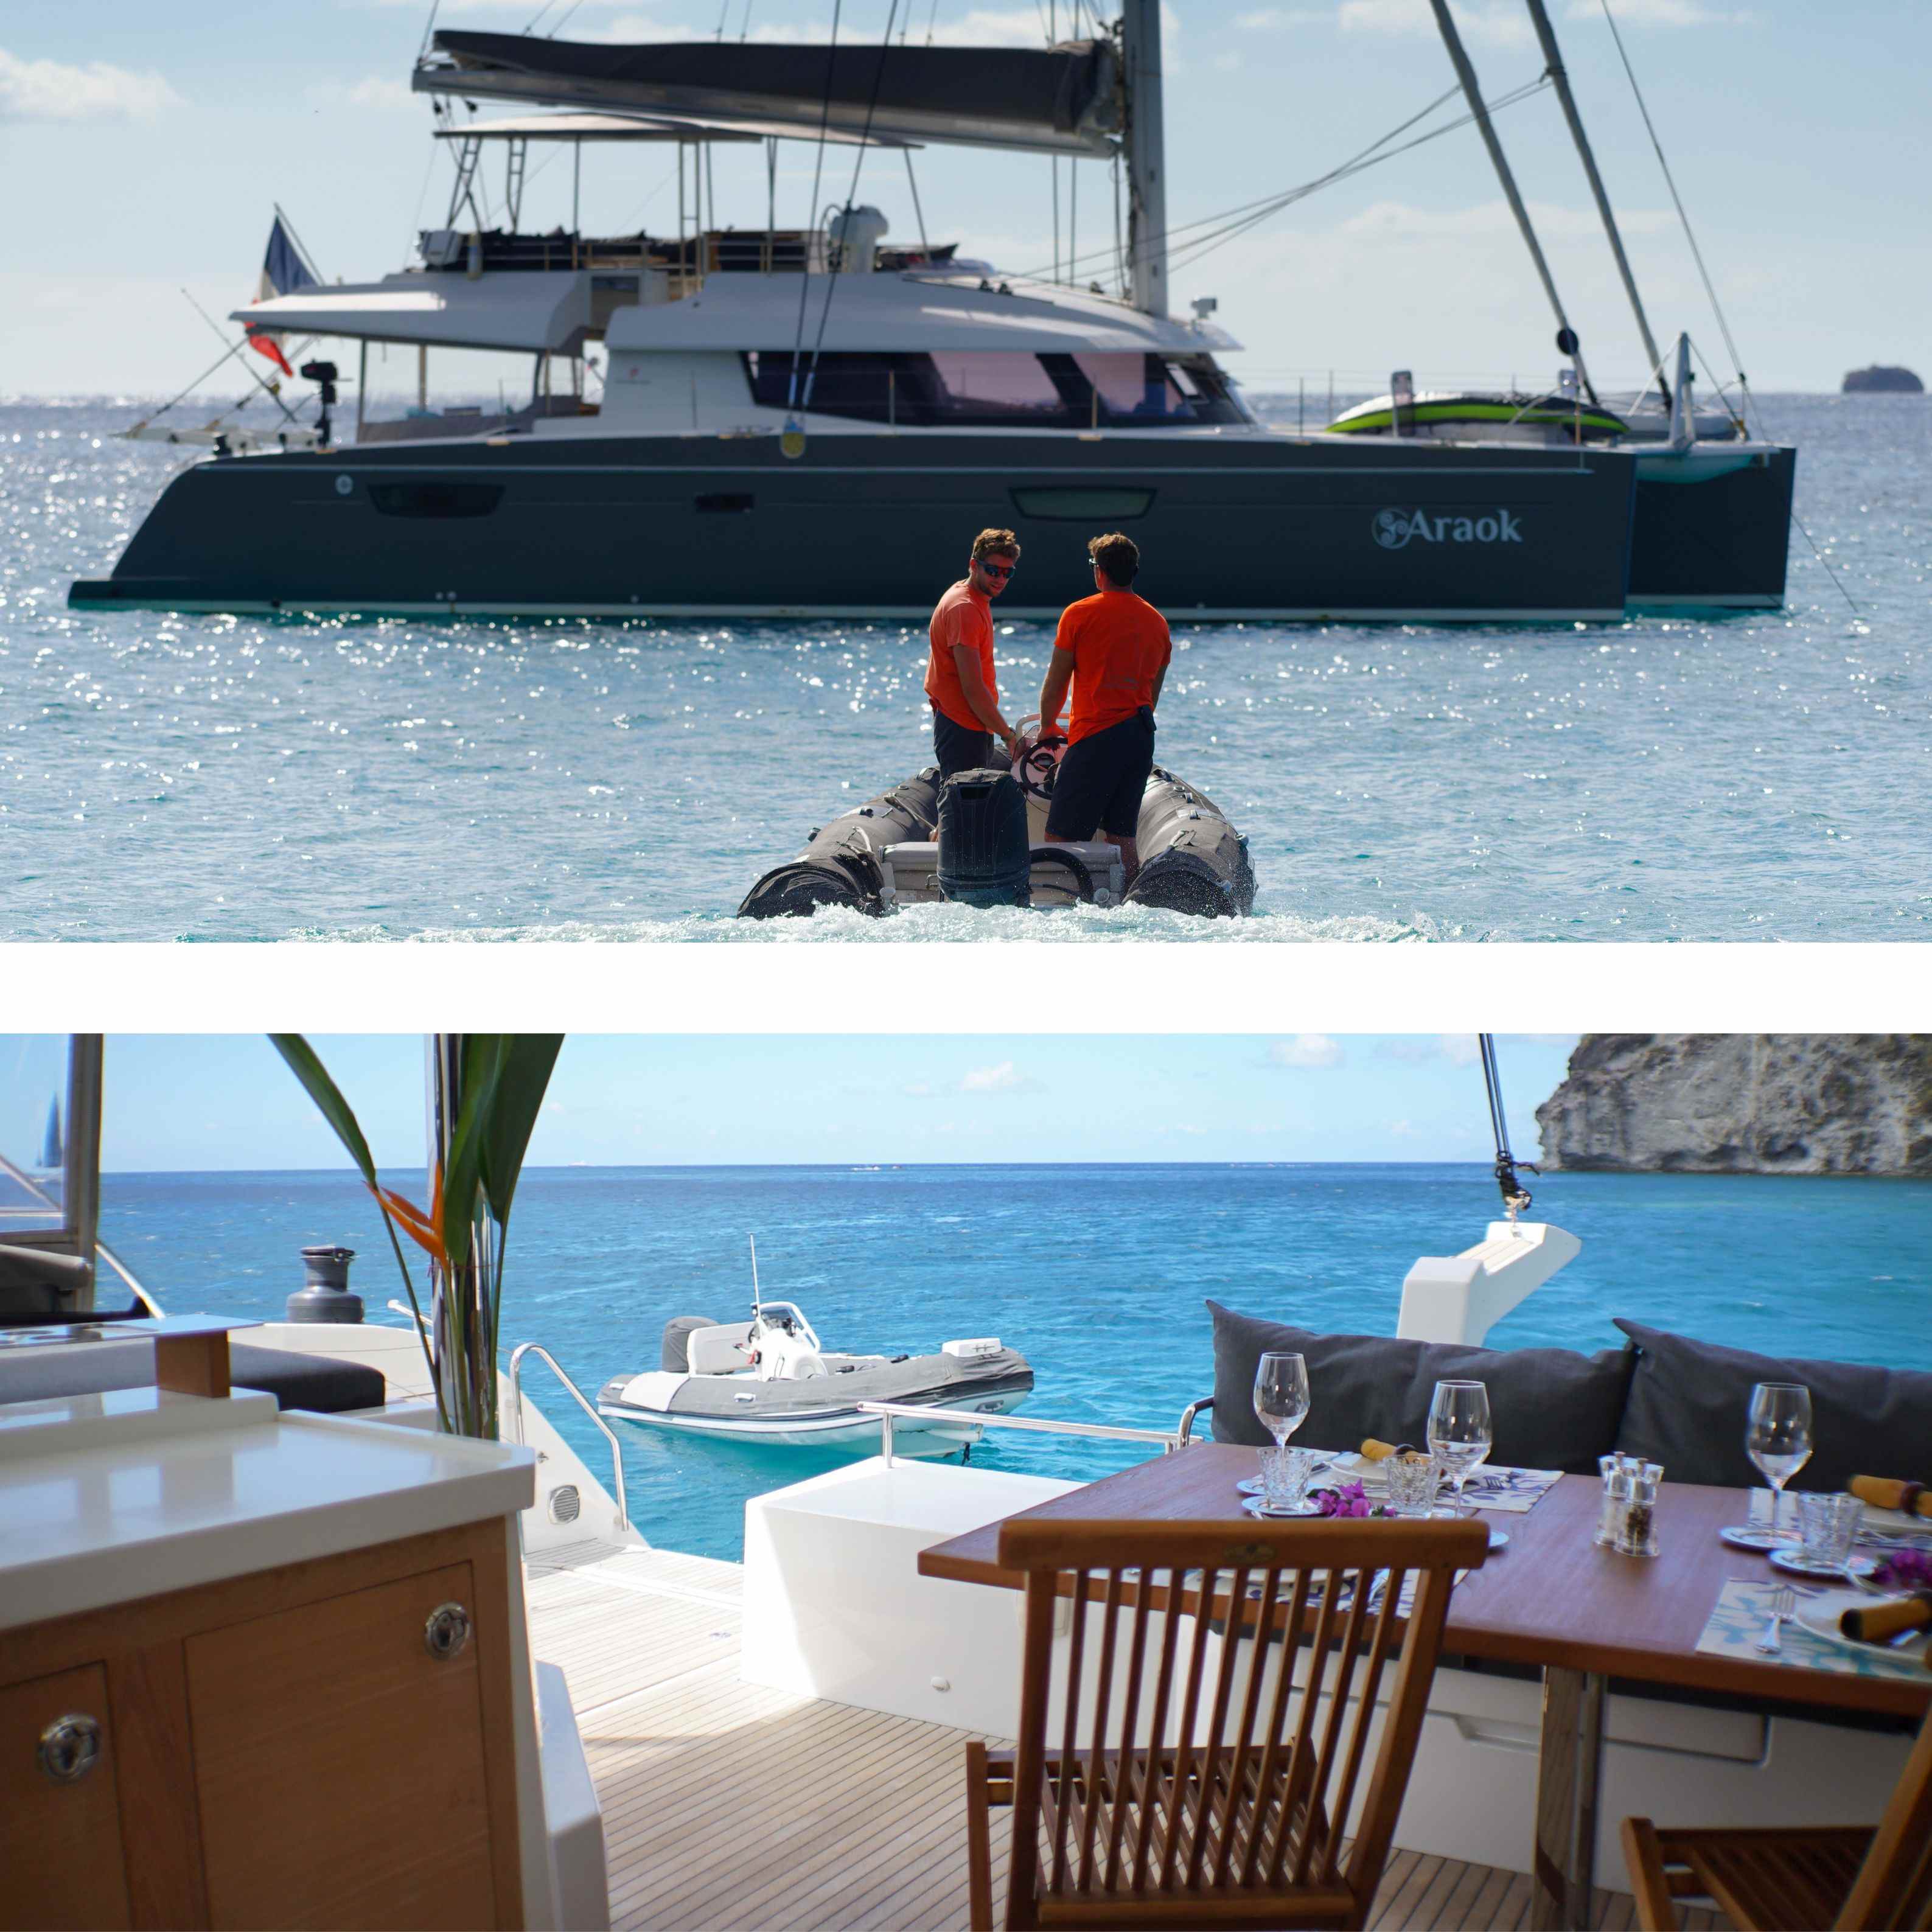 Ipanema 58 ARAOK: Ready for Charter this Summer in Italy!